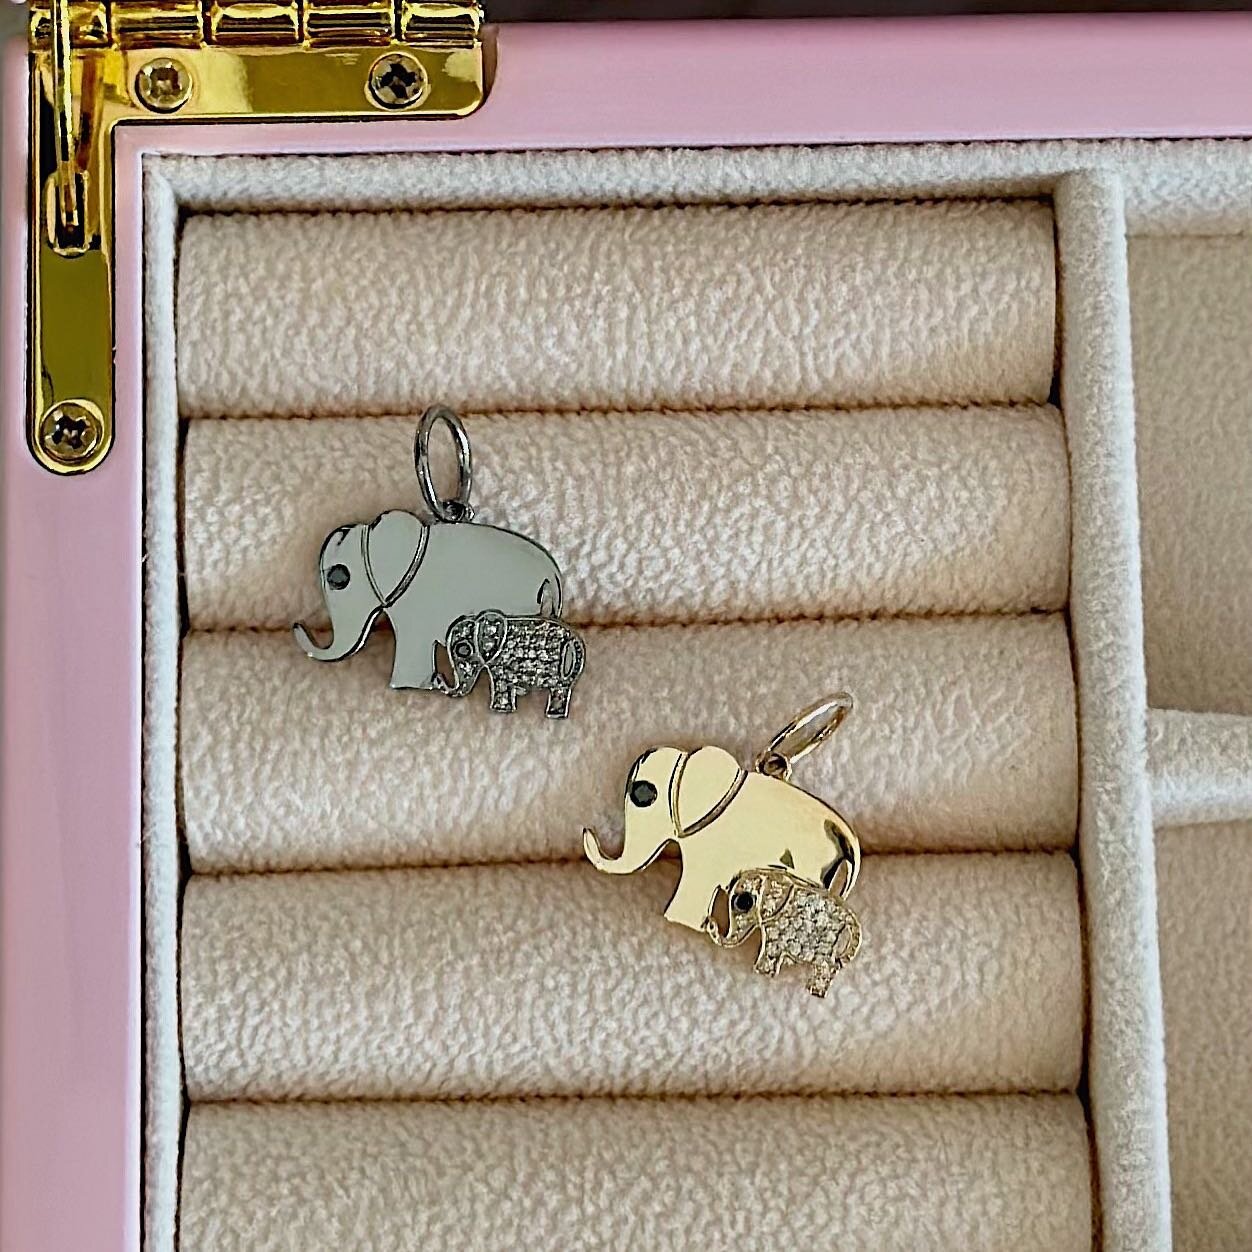 We may not be able to repay all that our mothers have done for us, but we can certainly try by spoiling her with some sparkle! Our double elephant pendant is a perfect gift for the lady you look up to 🐘❤️
&bull;
&bull;
&bull;
&bull;
&bull;
#cindyens